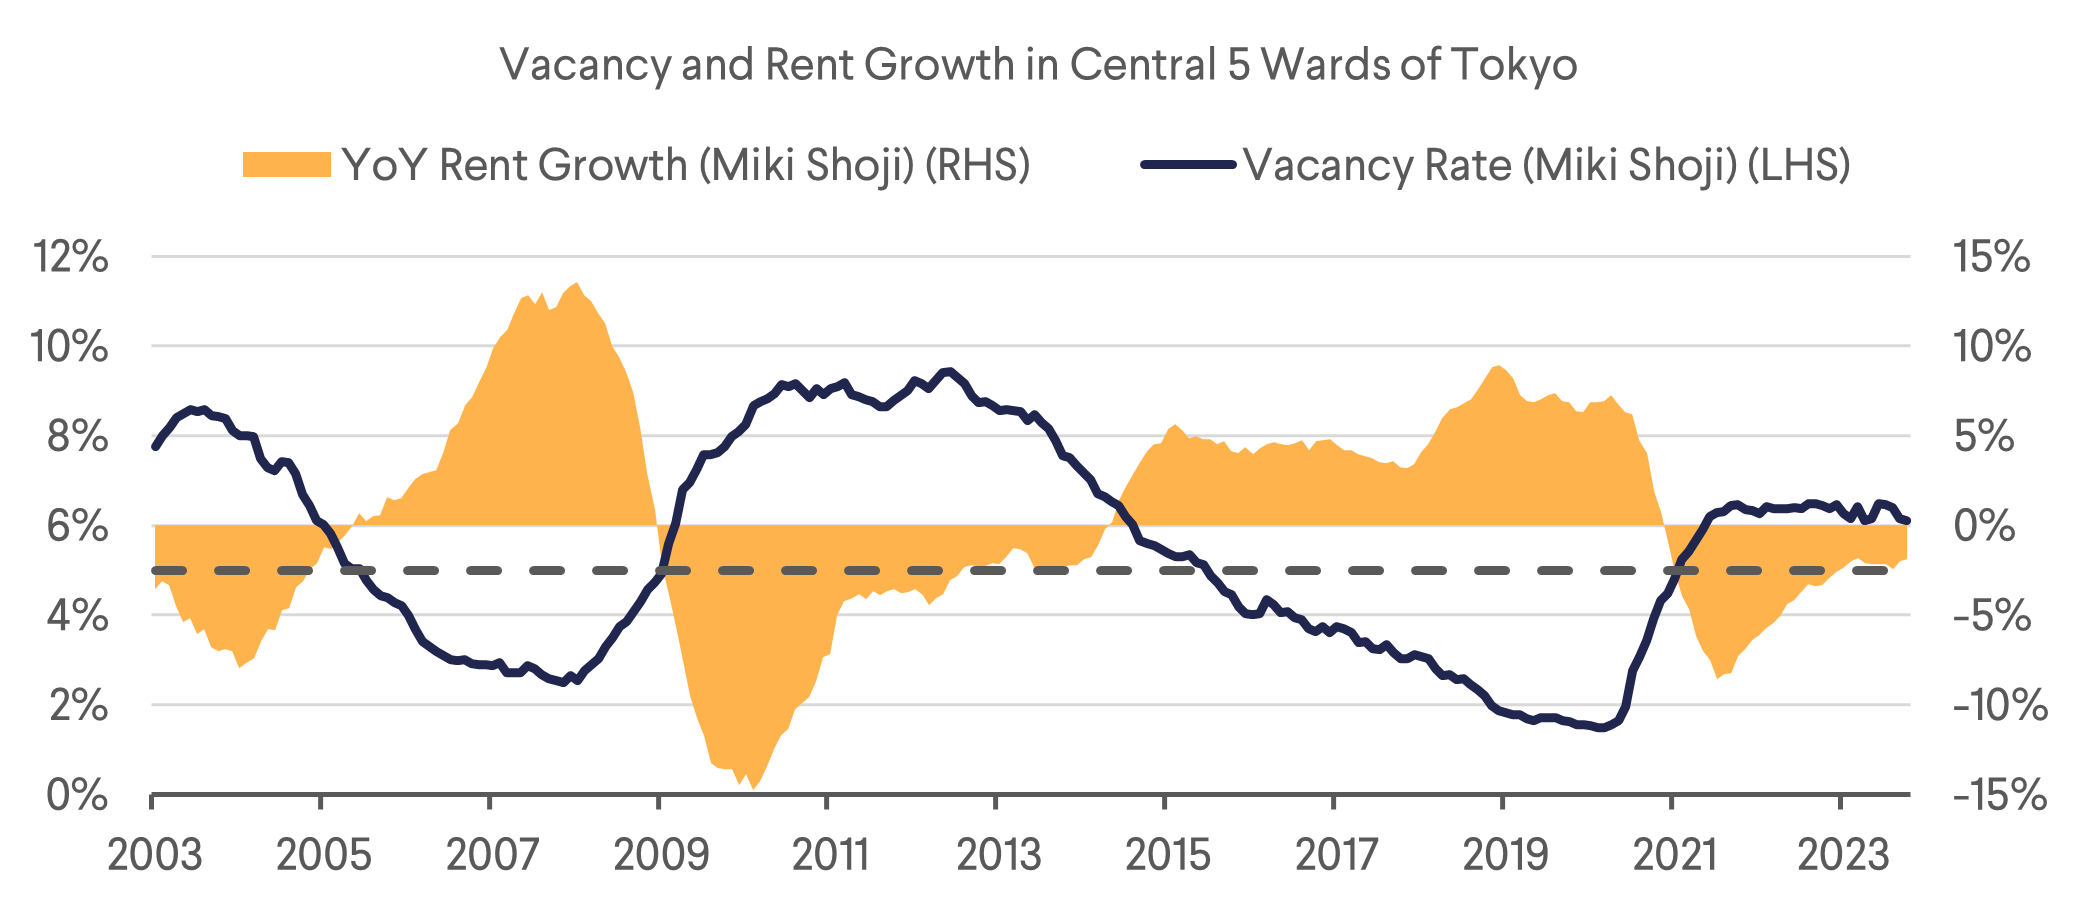 Vacancy and Rent Growth in Central 5 Wards of Tokyo